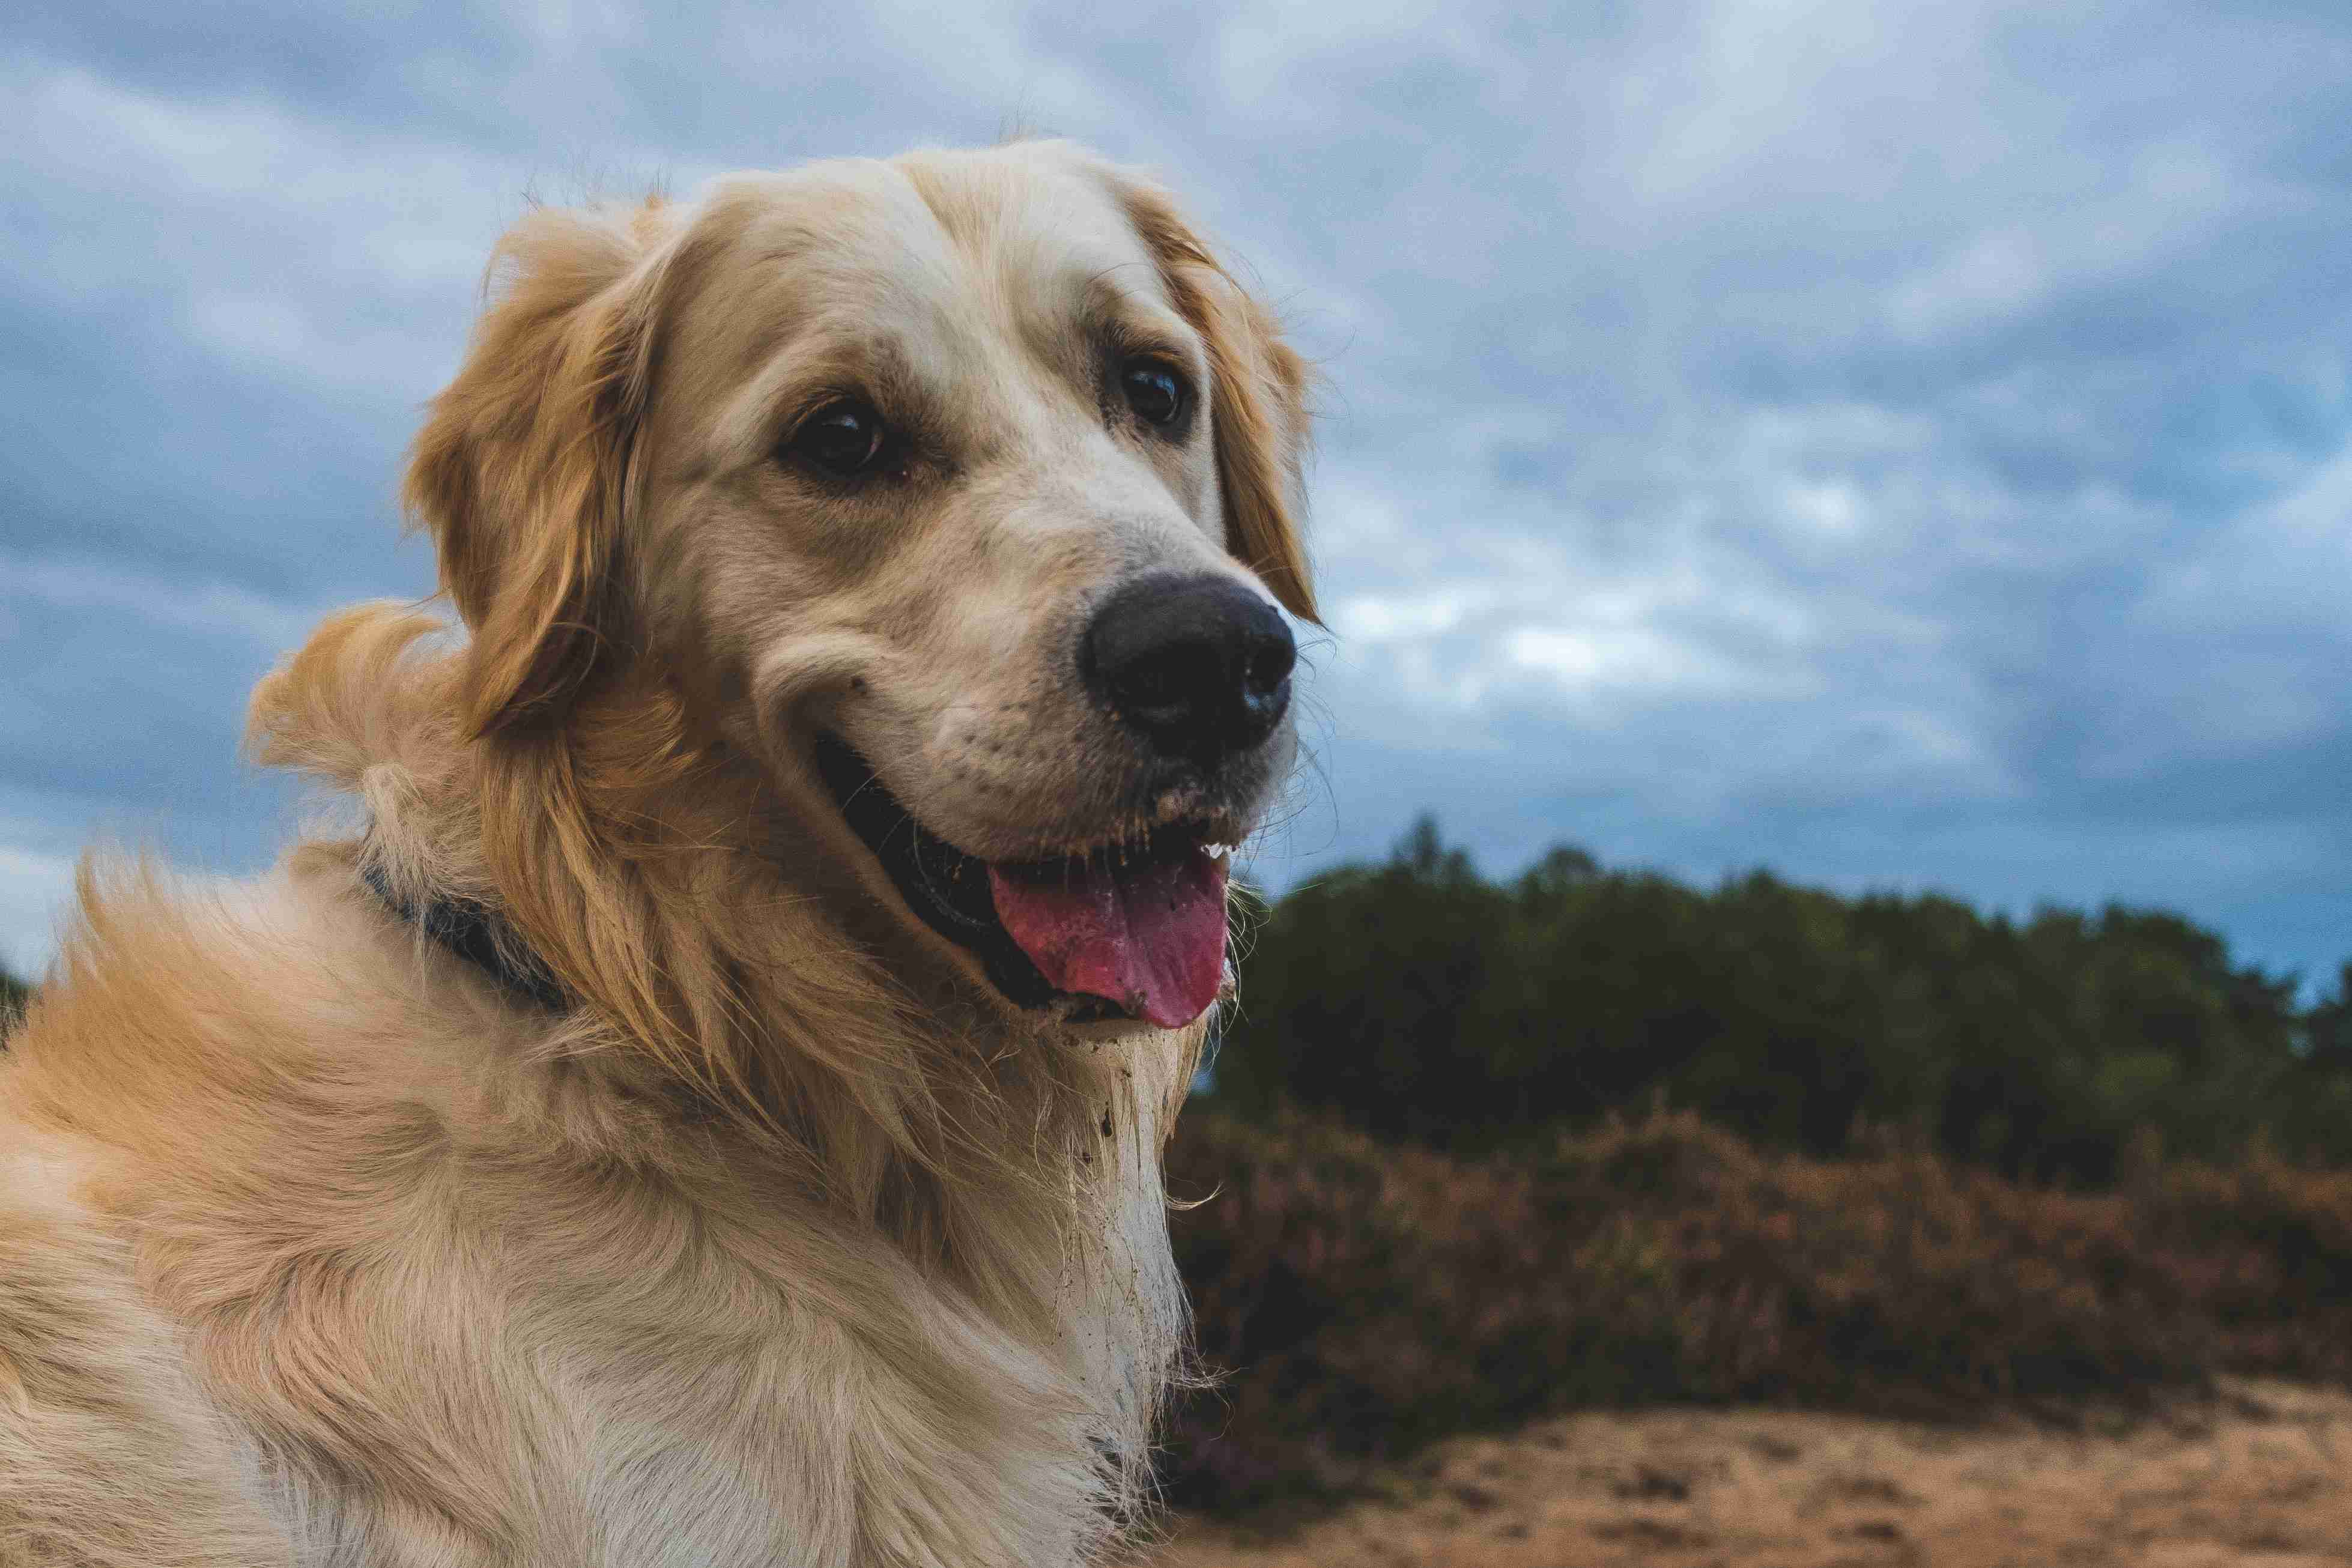 Teaching Your Golden Retriever to Play Gently: Top Best Practices for a Soft Mouth